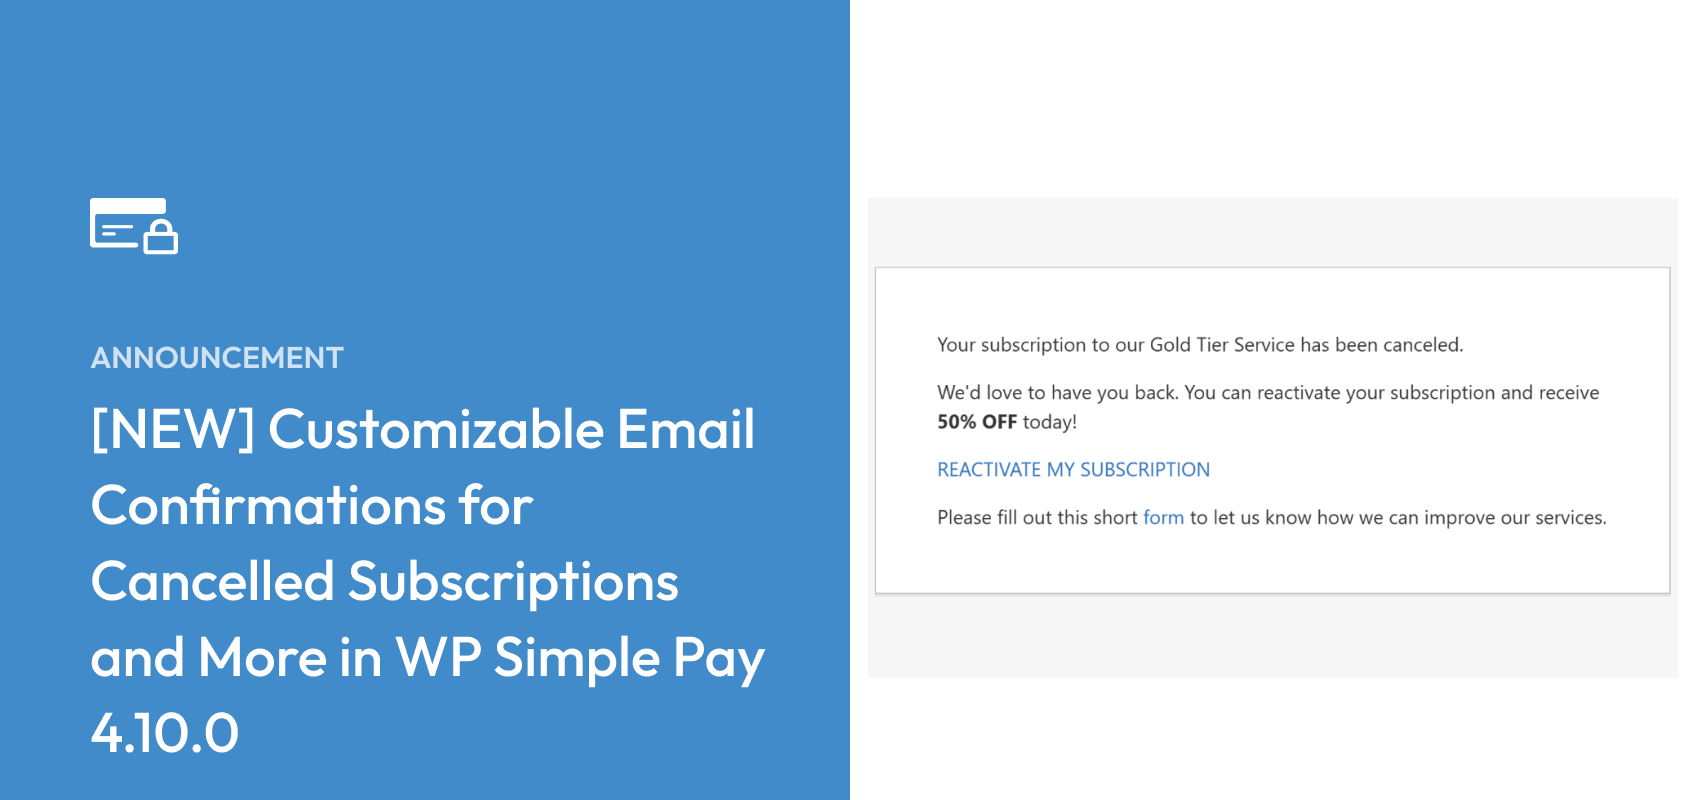 [NEW] Customizable Email Confirmations for Cancelled Subscriptions and More in WP Simple Pay 4.10.0